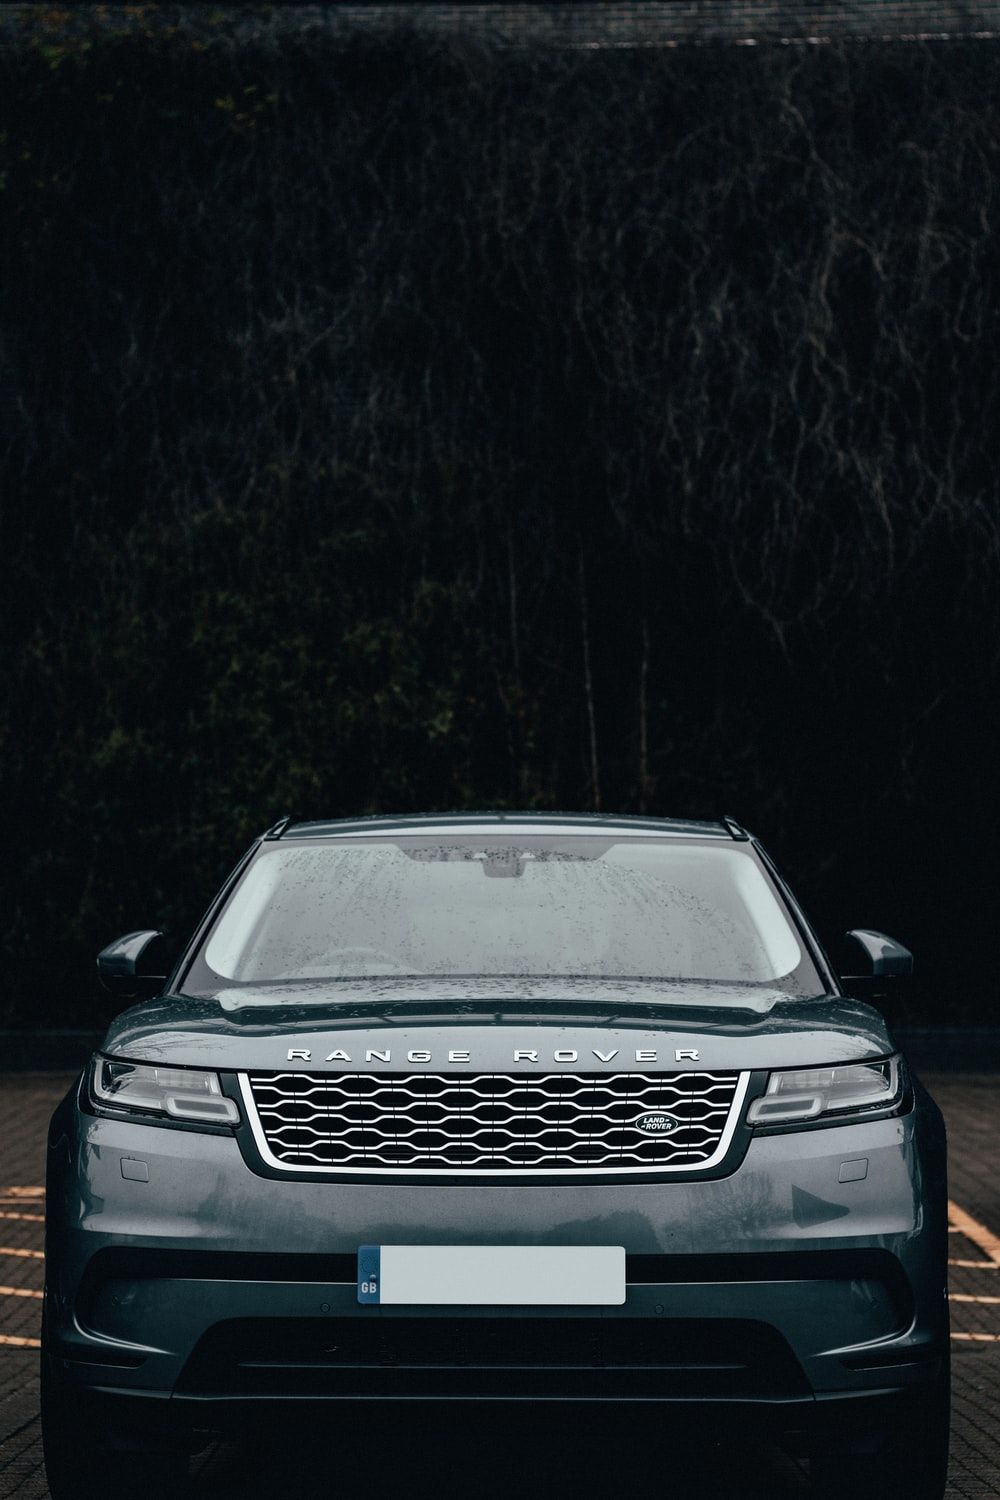 Range Rover Picture. Download Free Image